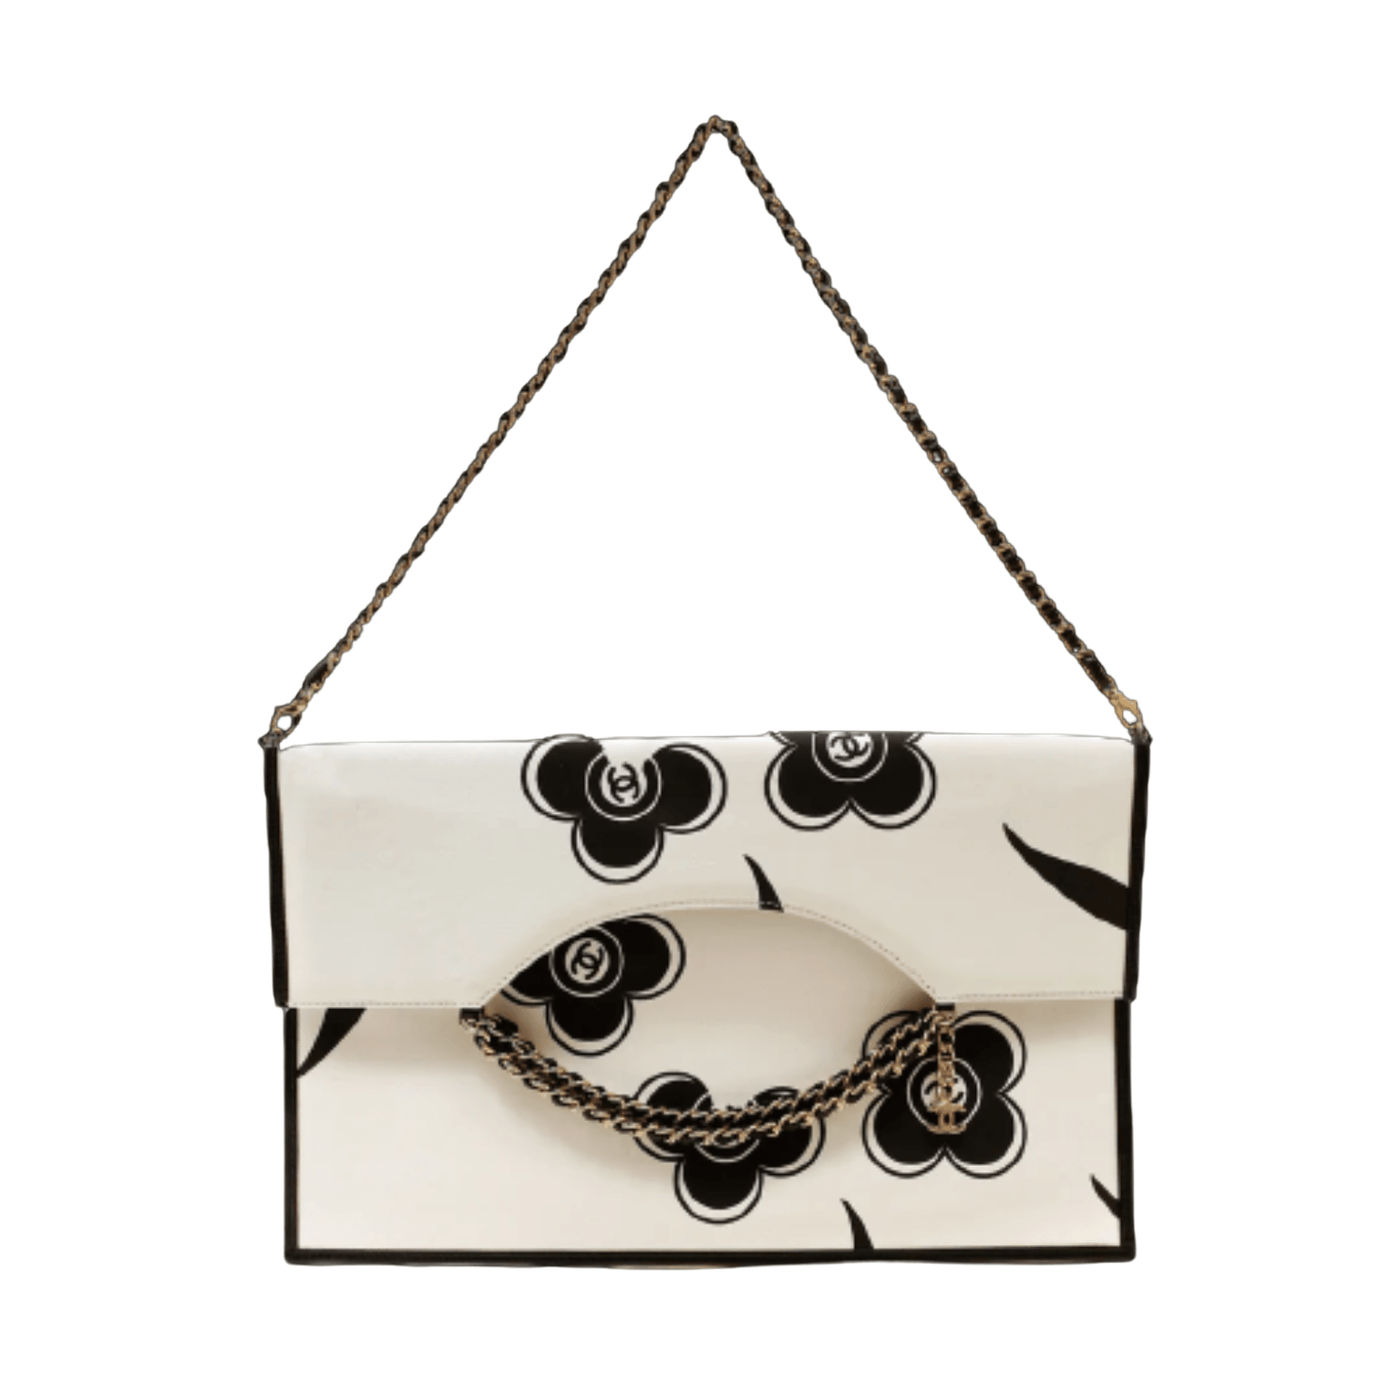 Chanel Ivory and Black Camellia Envelope Clutch with Strap – Only